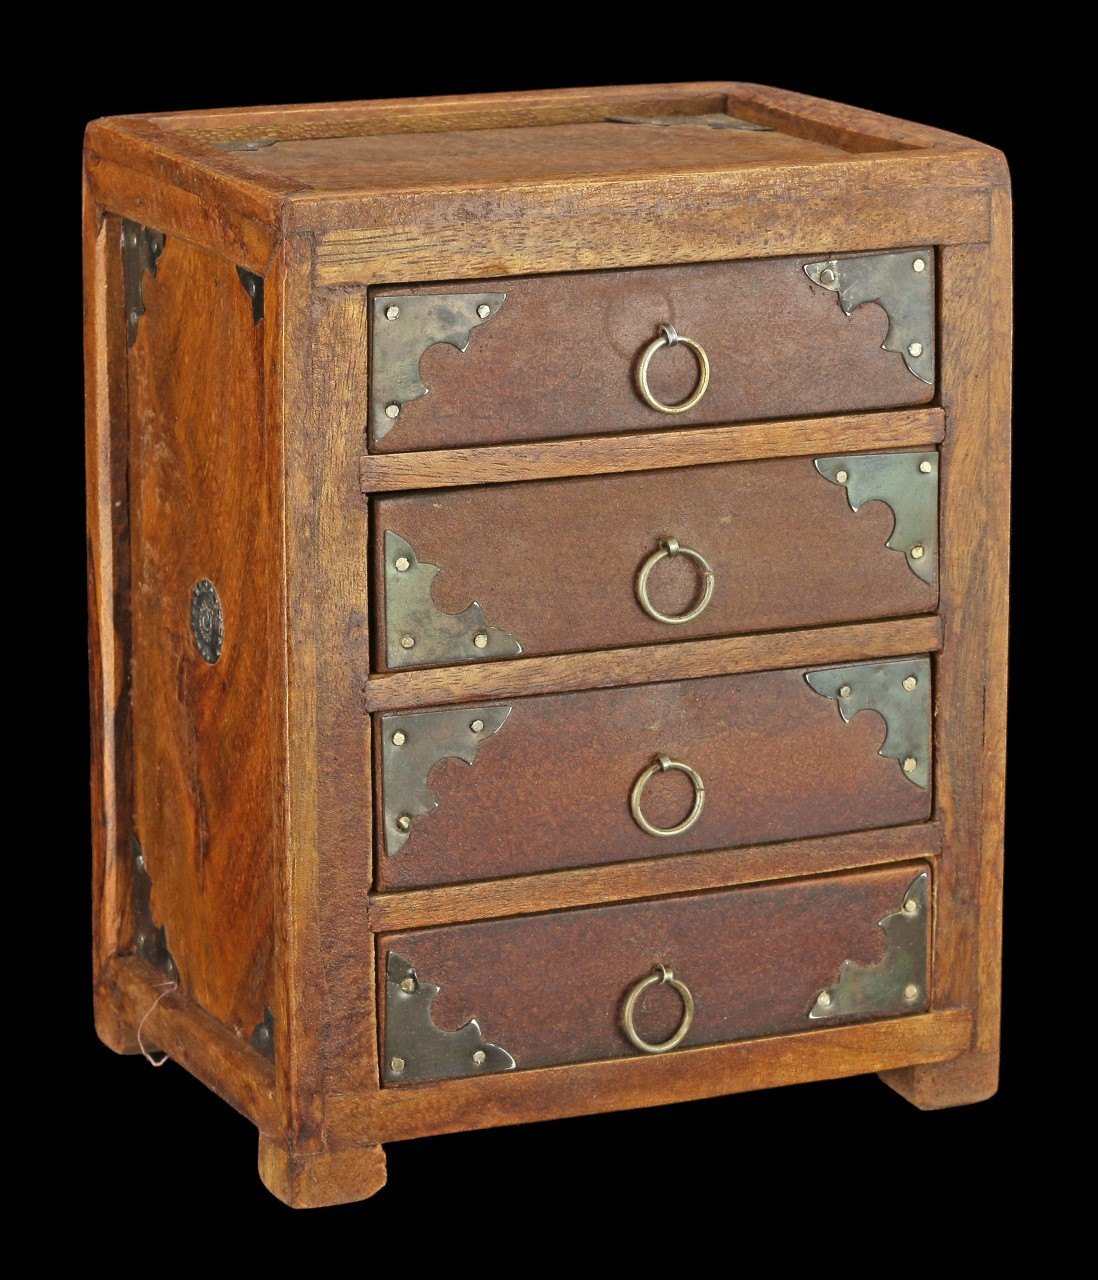 Medieval Wooden Jewelry Box - with 4 Drawers